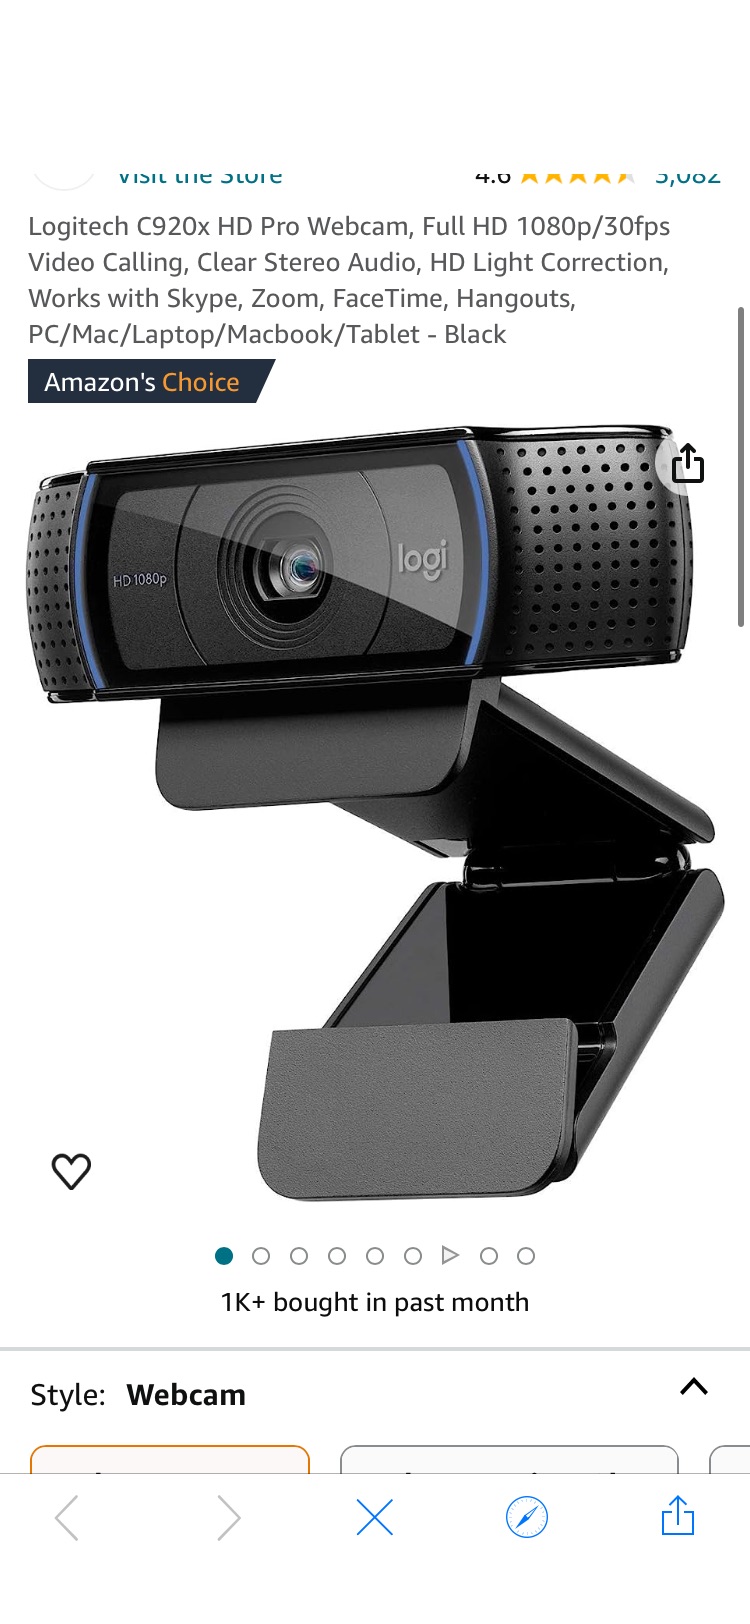 Logitech C920x HD Pro Webcam, Full HD 1080p/30fps Video Calling, Clear Stereo Audio, HD Light Correction, Works with Skype, Zoom, FaceTime, Hangouts, PC/Mac/Laptop/Macbook/Tablet - Black : Amazon.ca: 